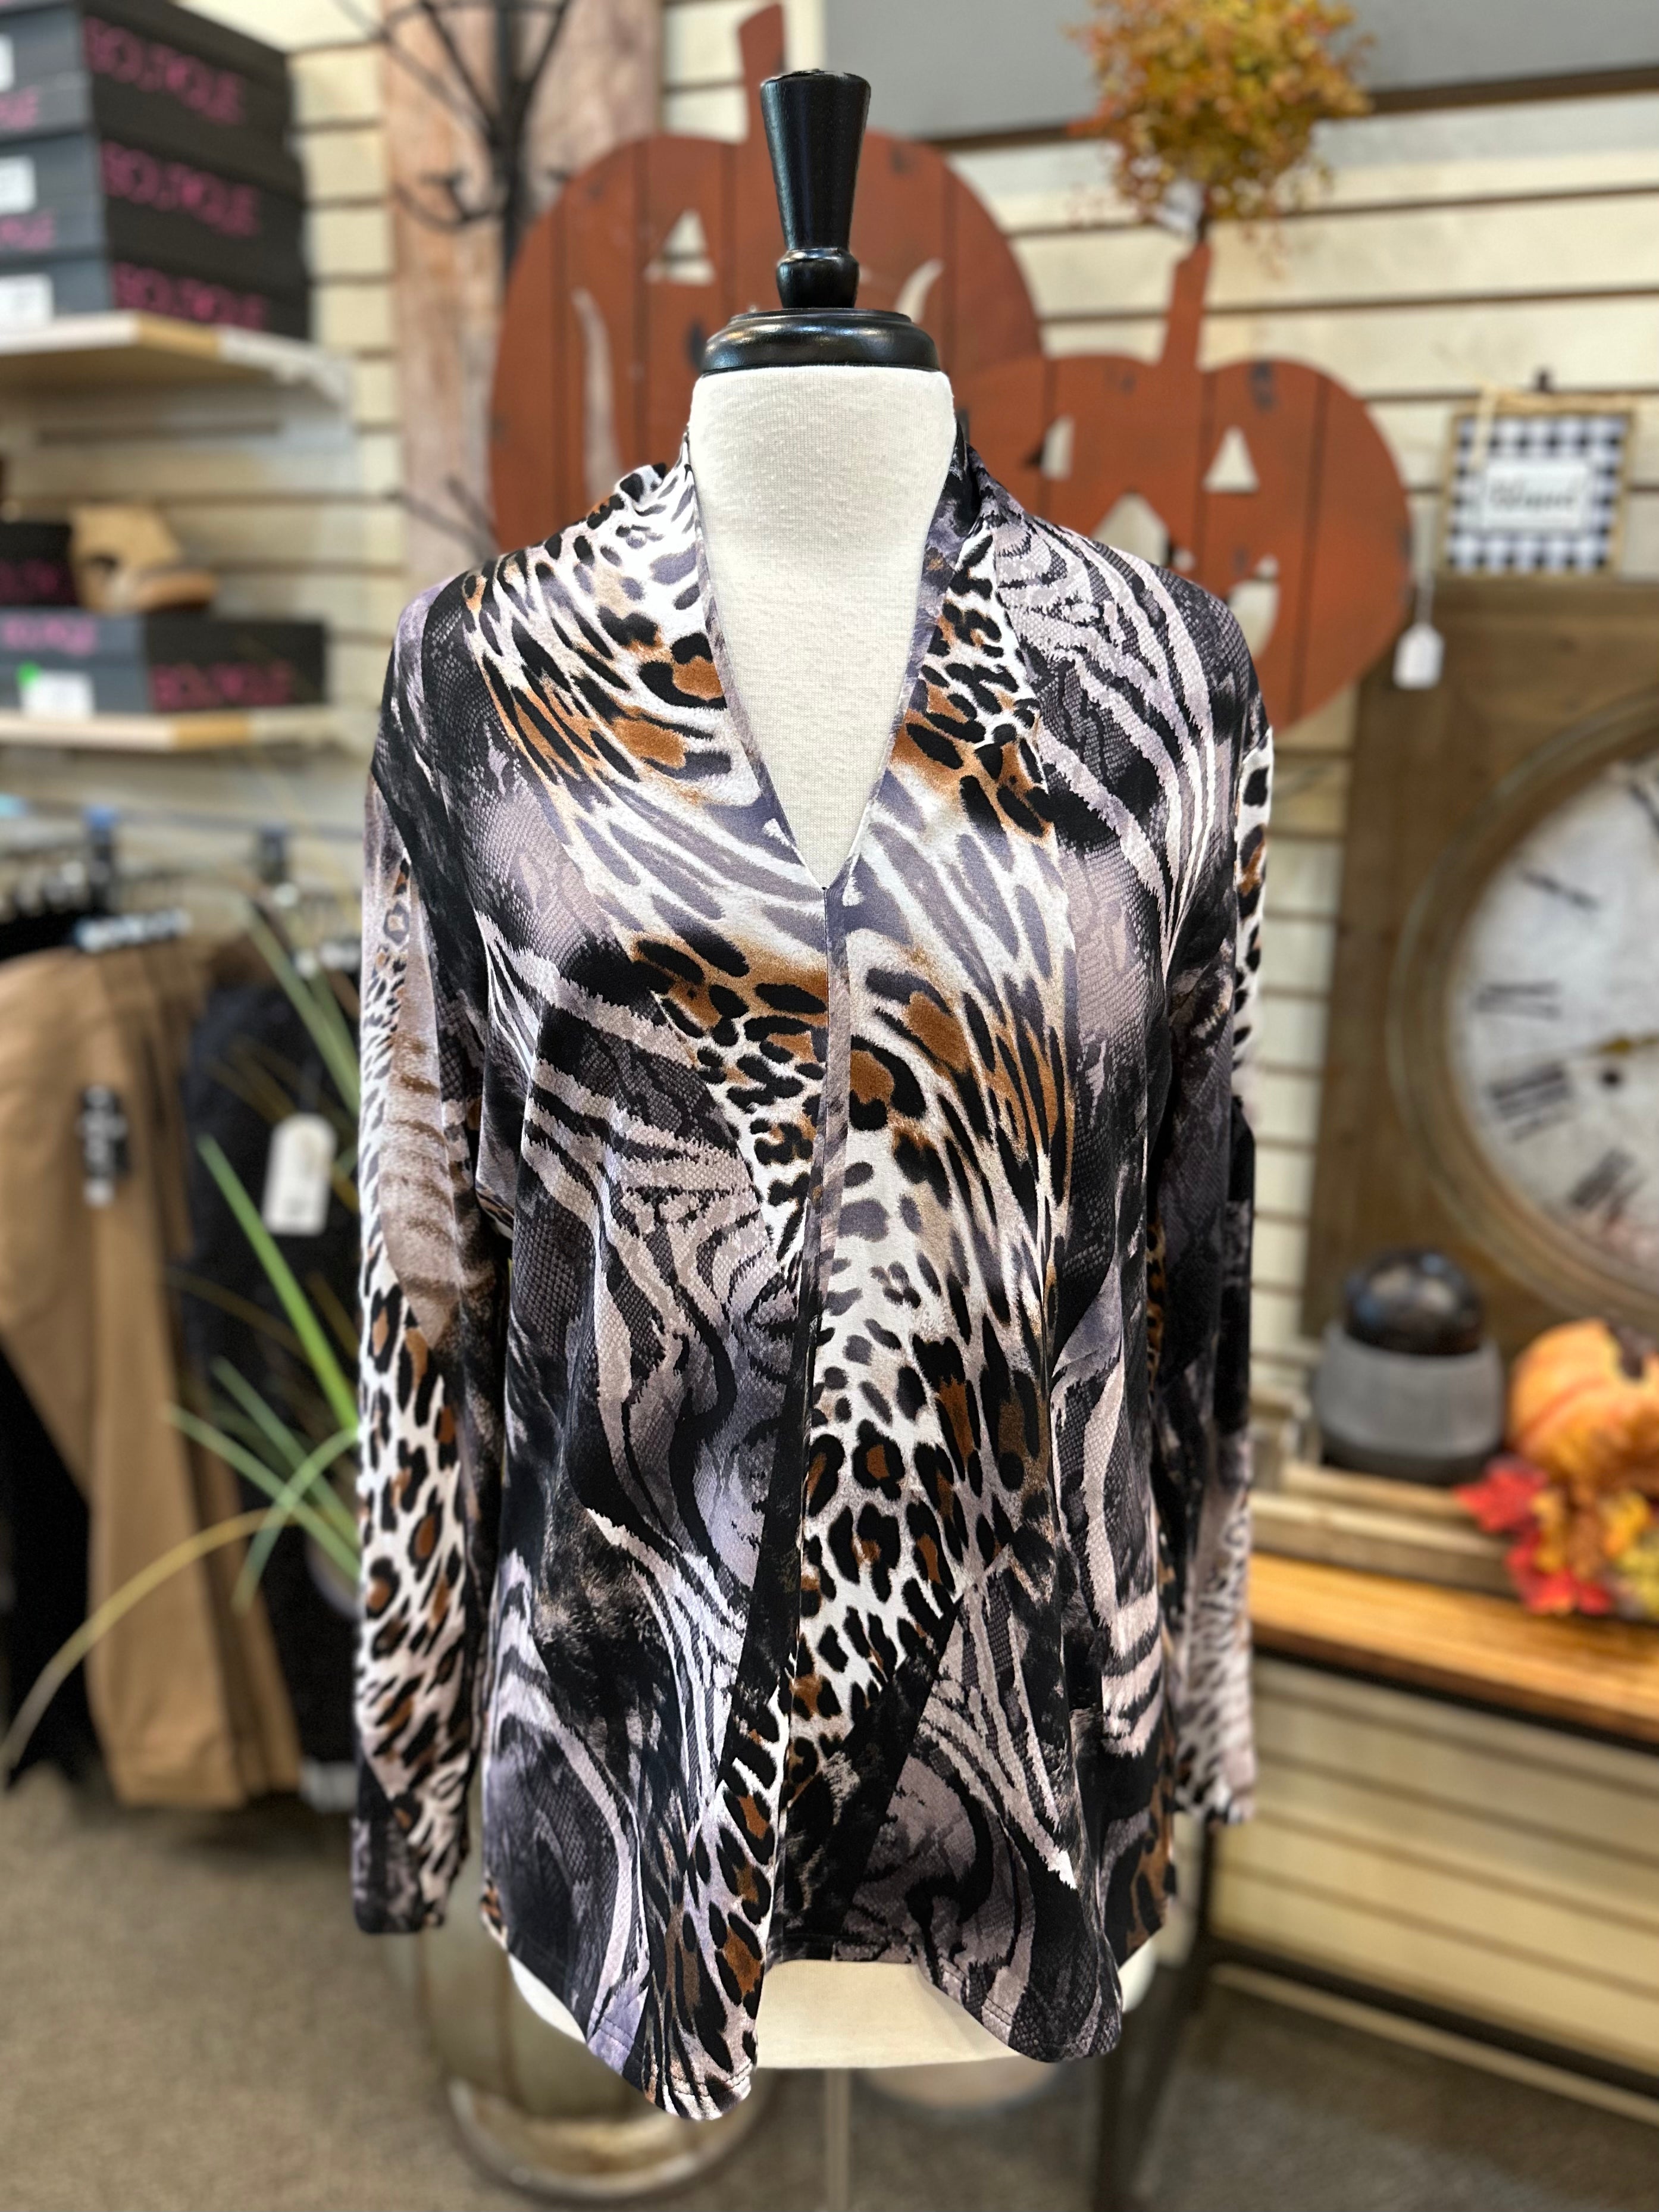 Ethyl Rolled Neck Knit Animal Print Top